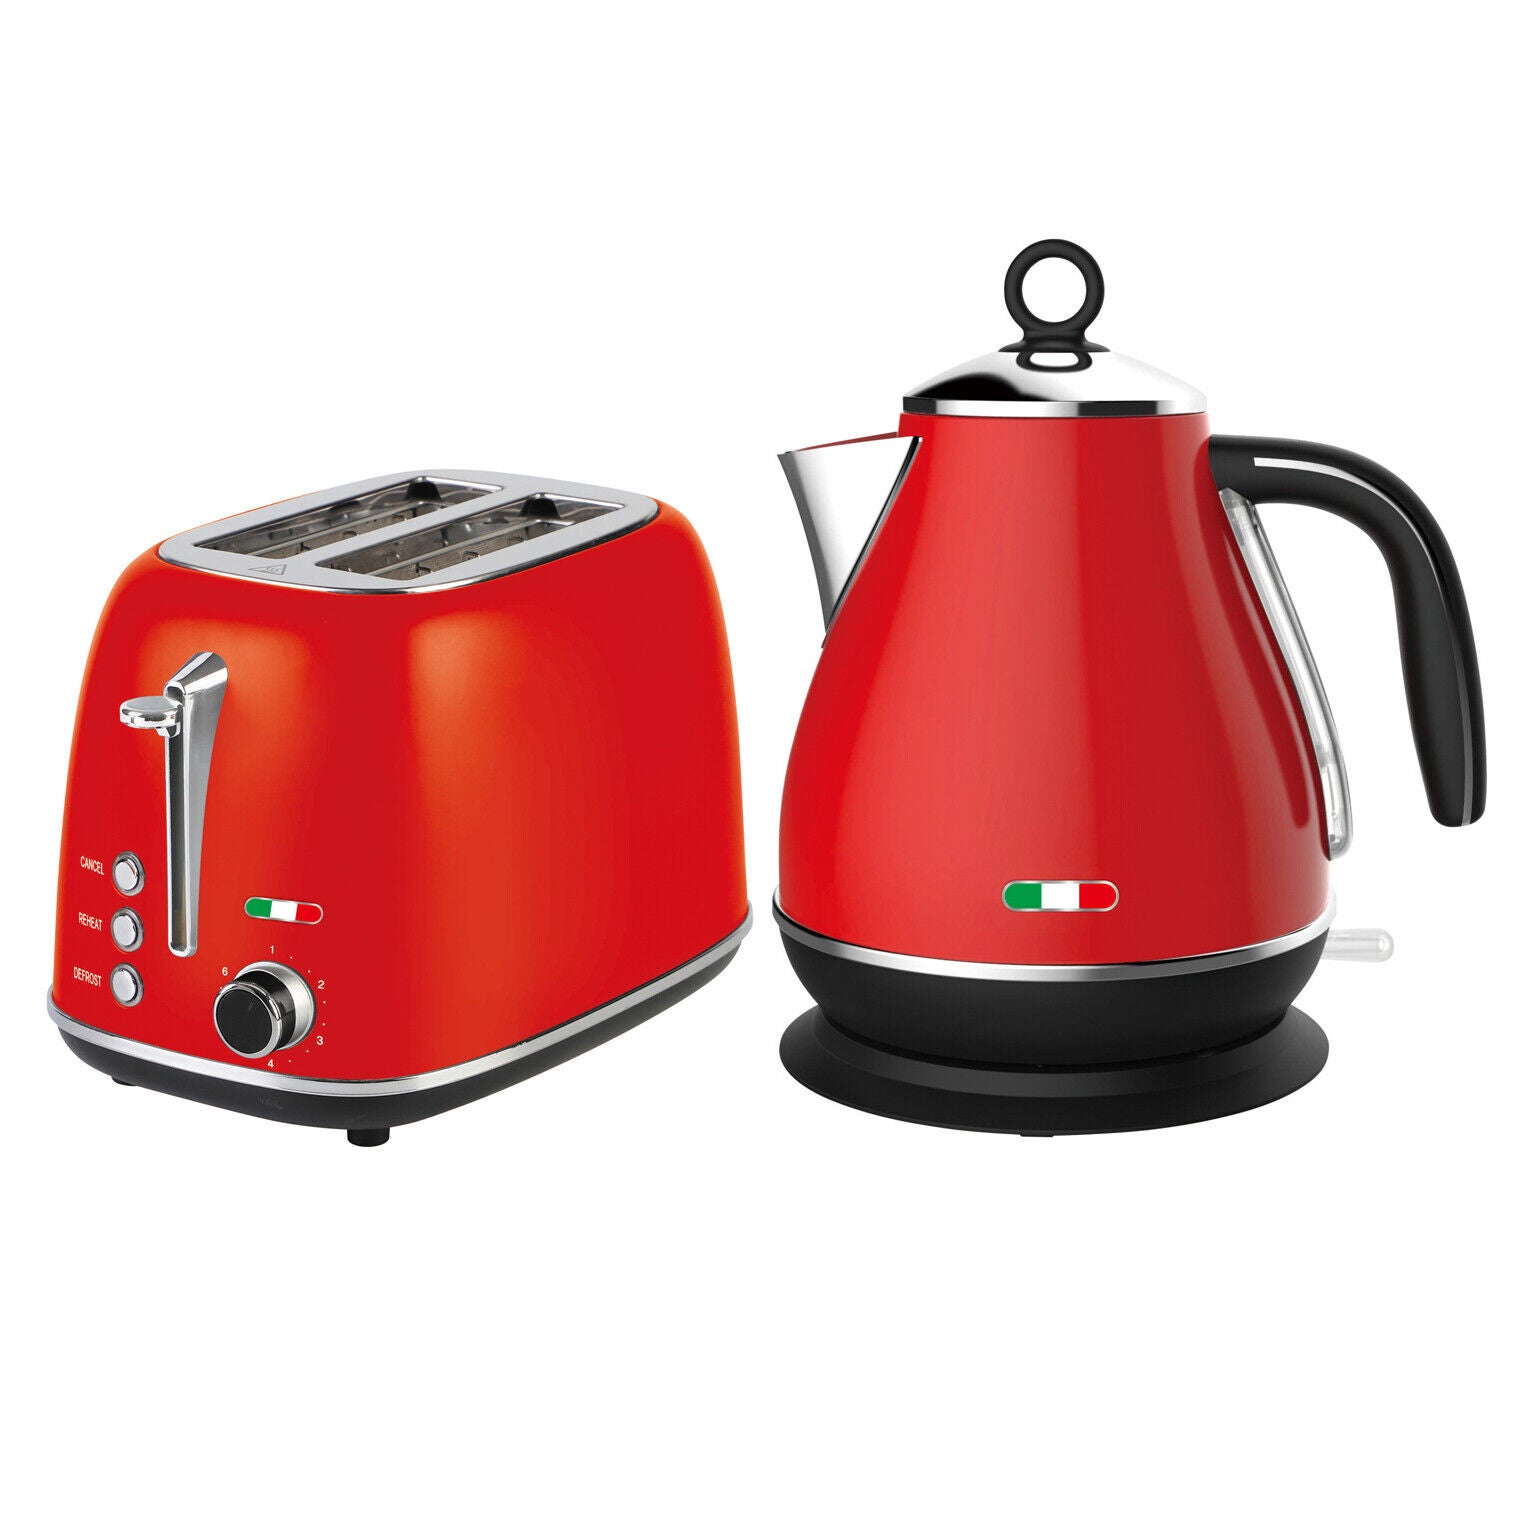 Vintage Electric Kettle and 2 Slice Toaster SET Combo Deal Stainless Steel Red